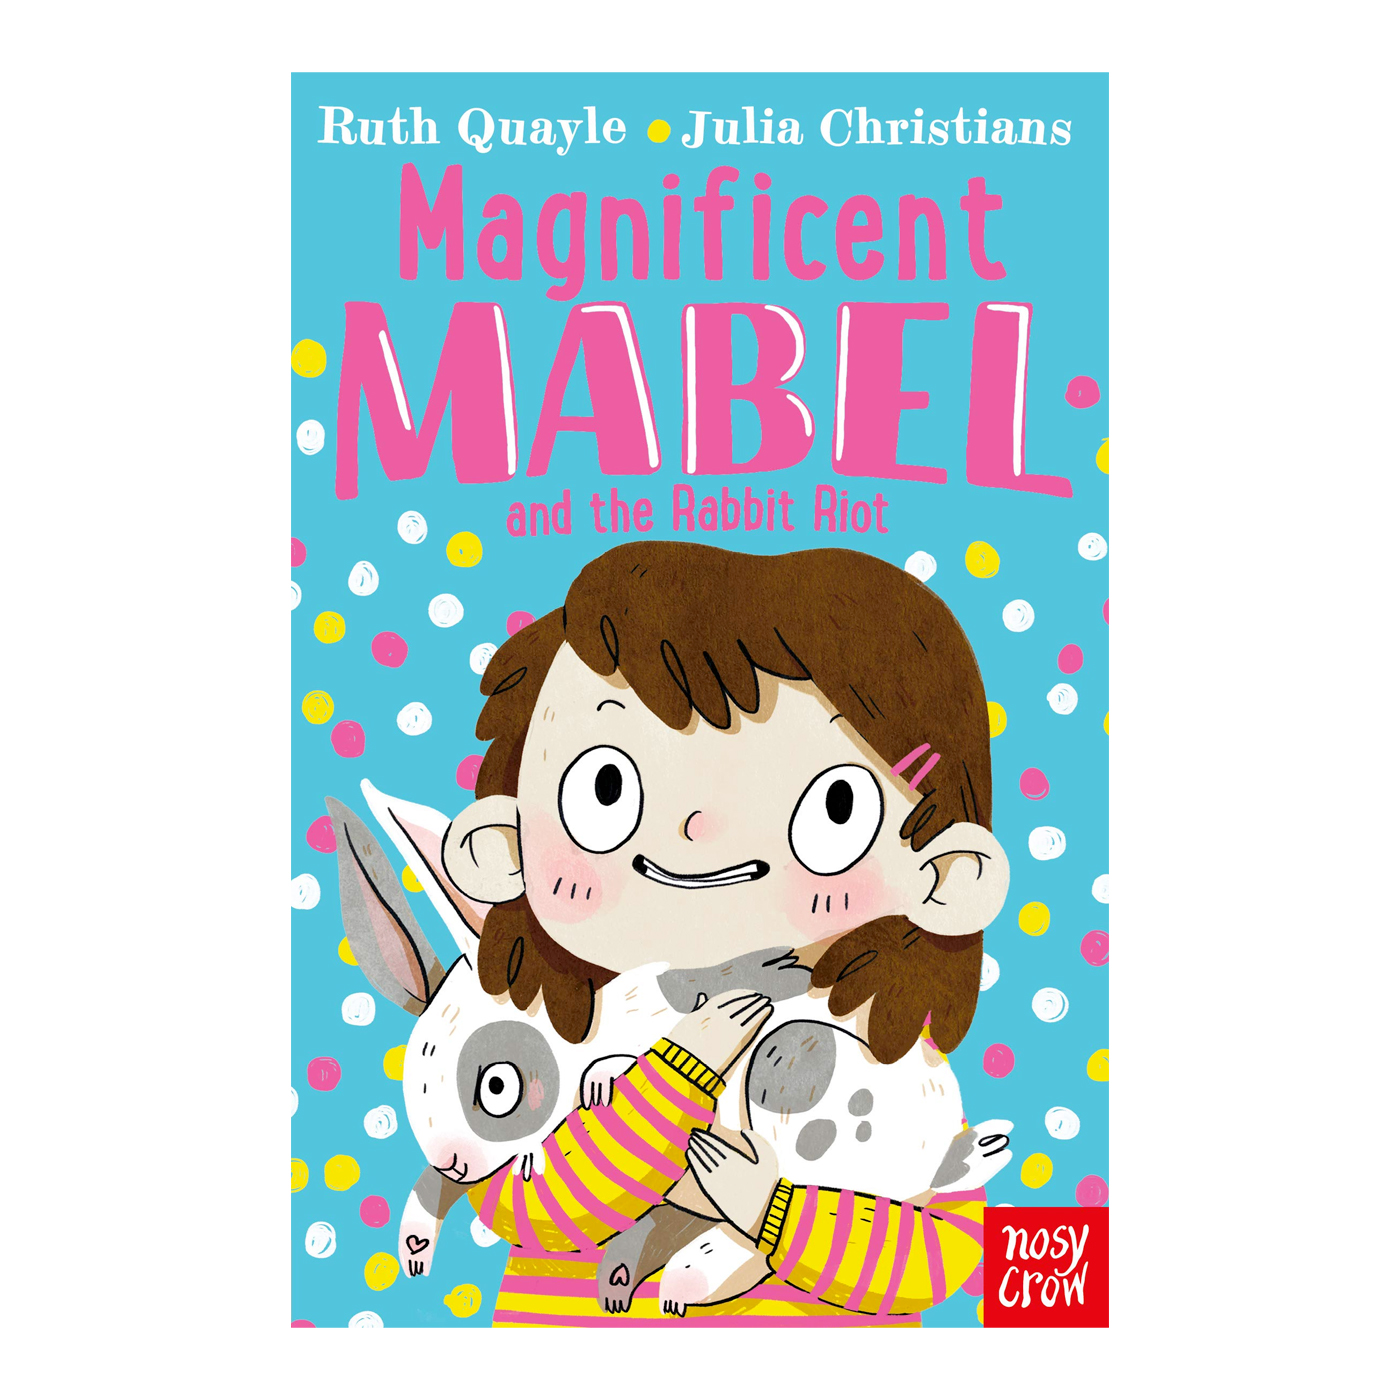  Magnificent Mabel and the Rabbit Riot